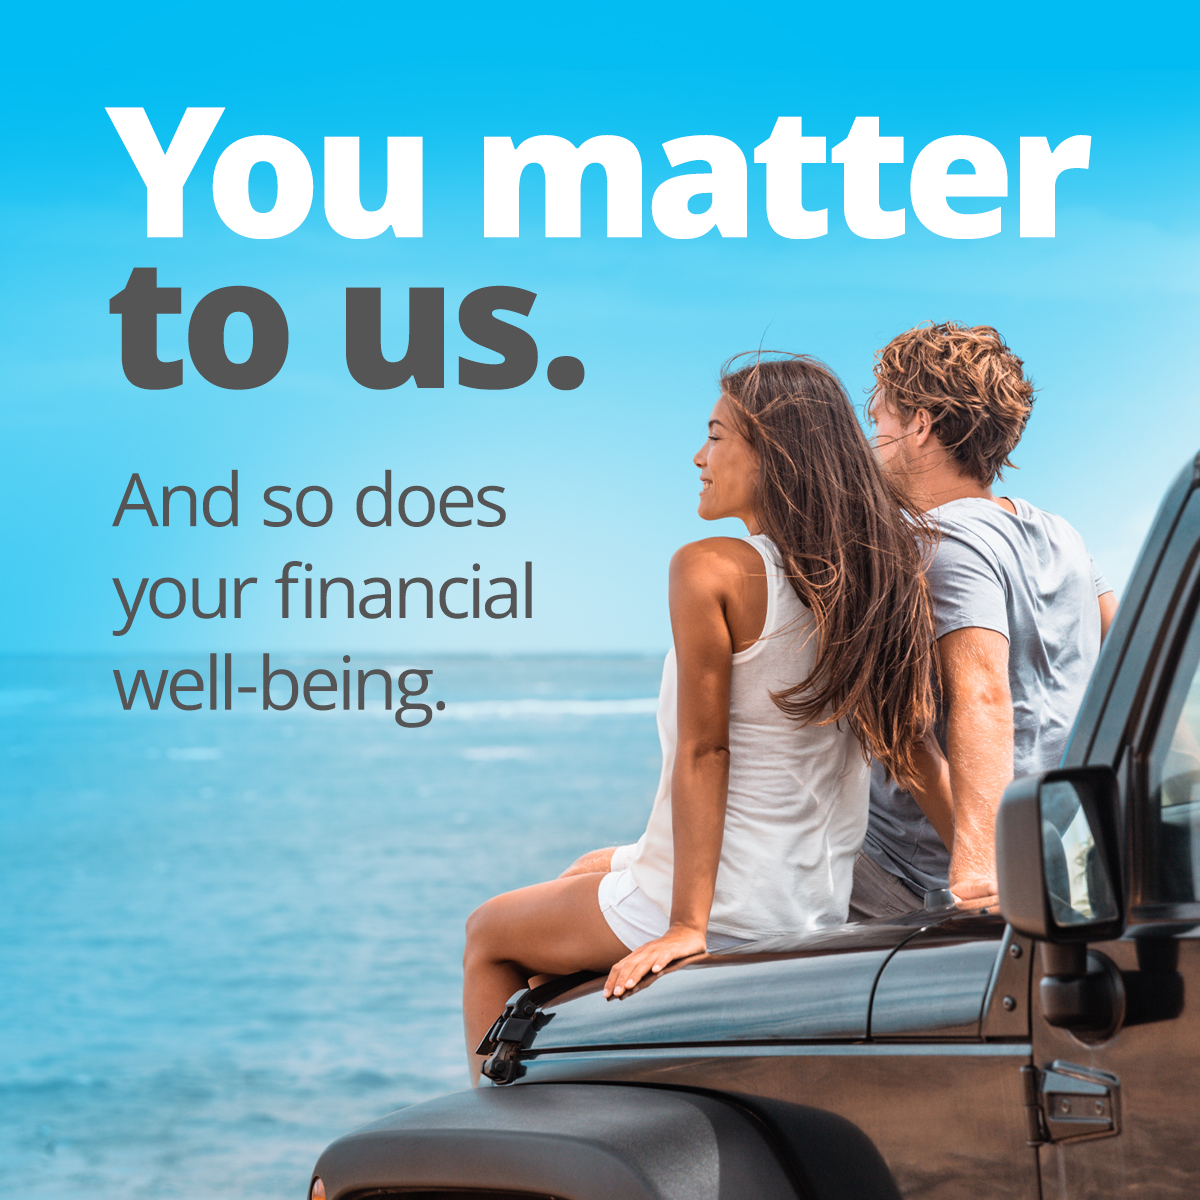 You matter to us. And so does your financial well-being.